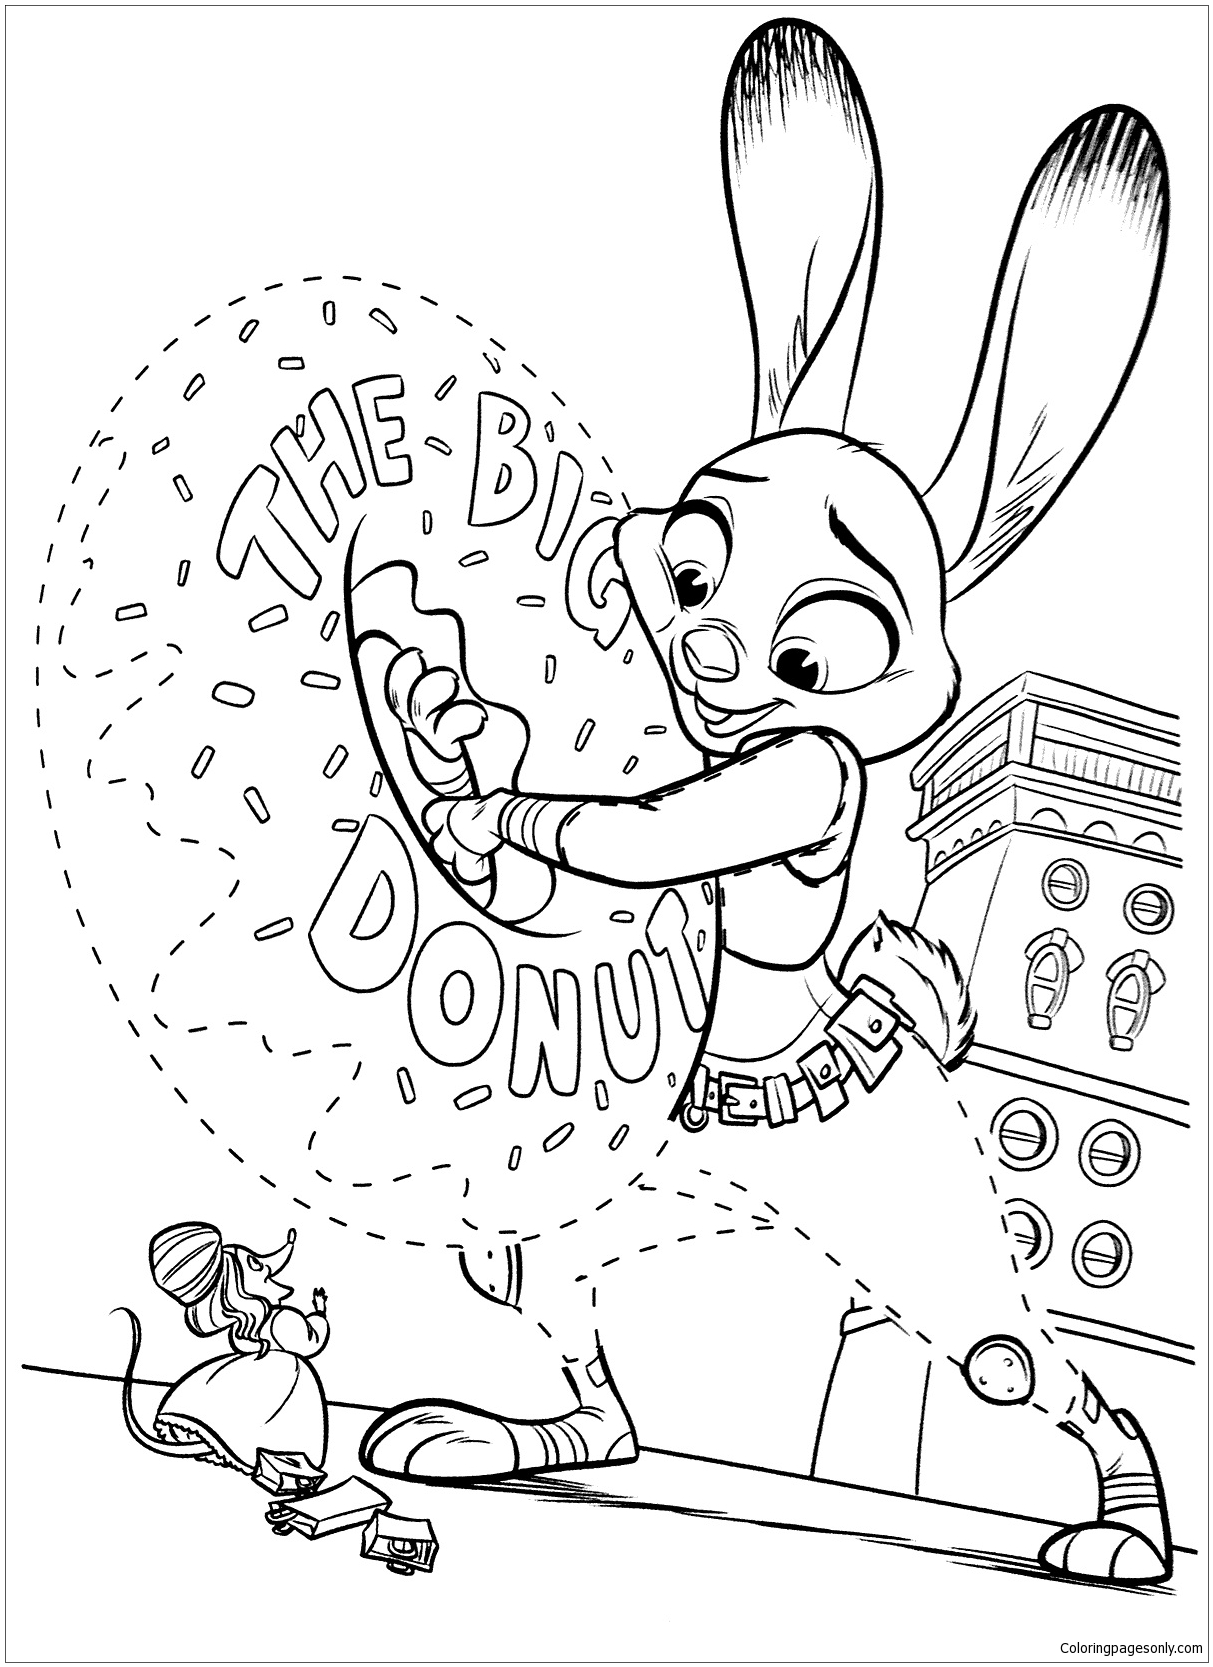 Zootopia – image 10 Coloring Pages